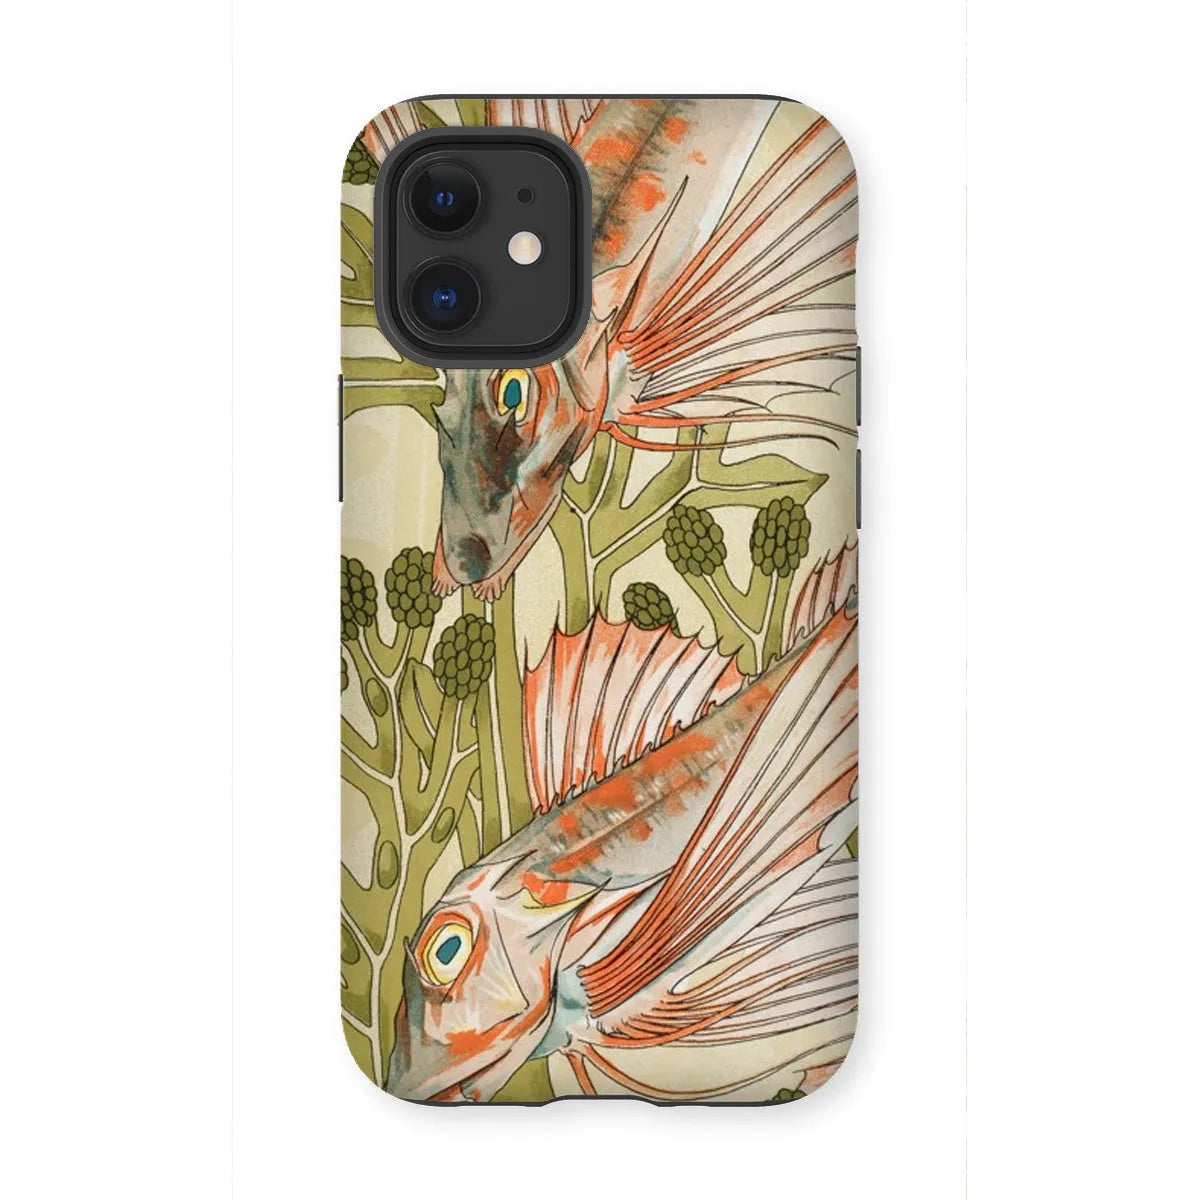 Red Fish - Animal Art Phone Case - Maurice Pillard Verneuil - Iphone 12 Mini / Matte - Mobile Phone Cases - Aesthetic